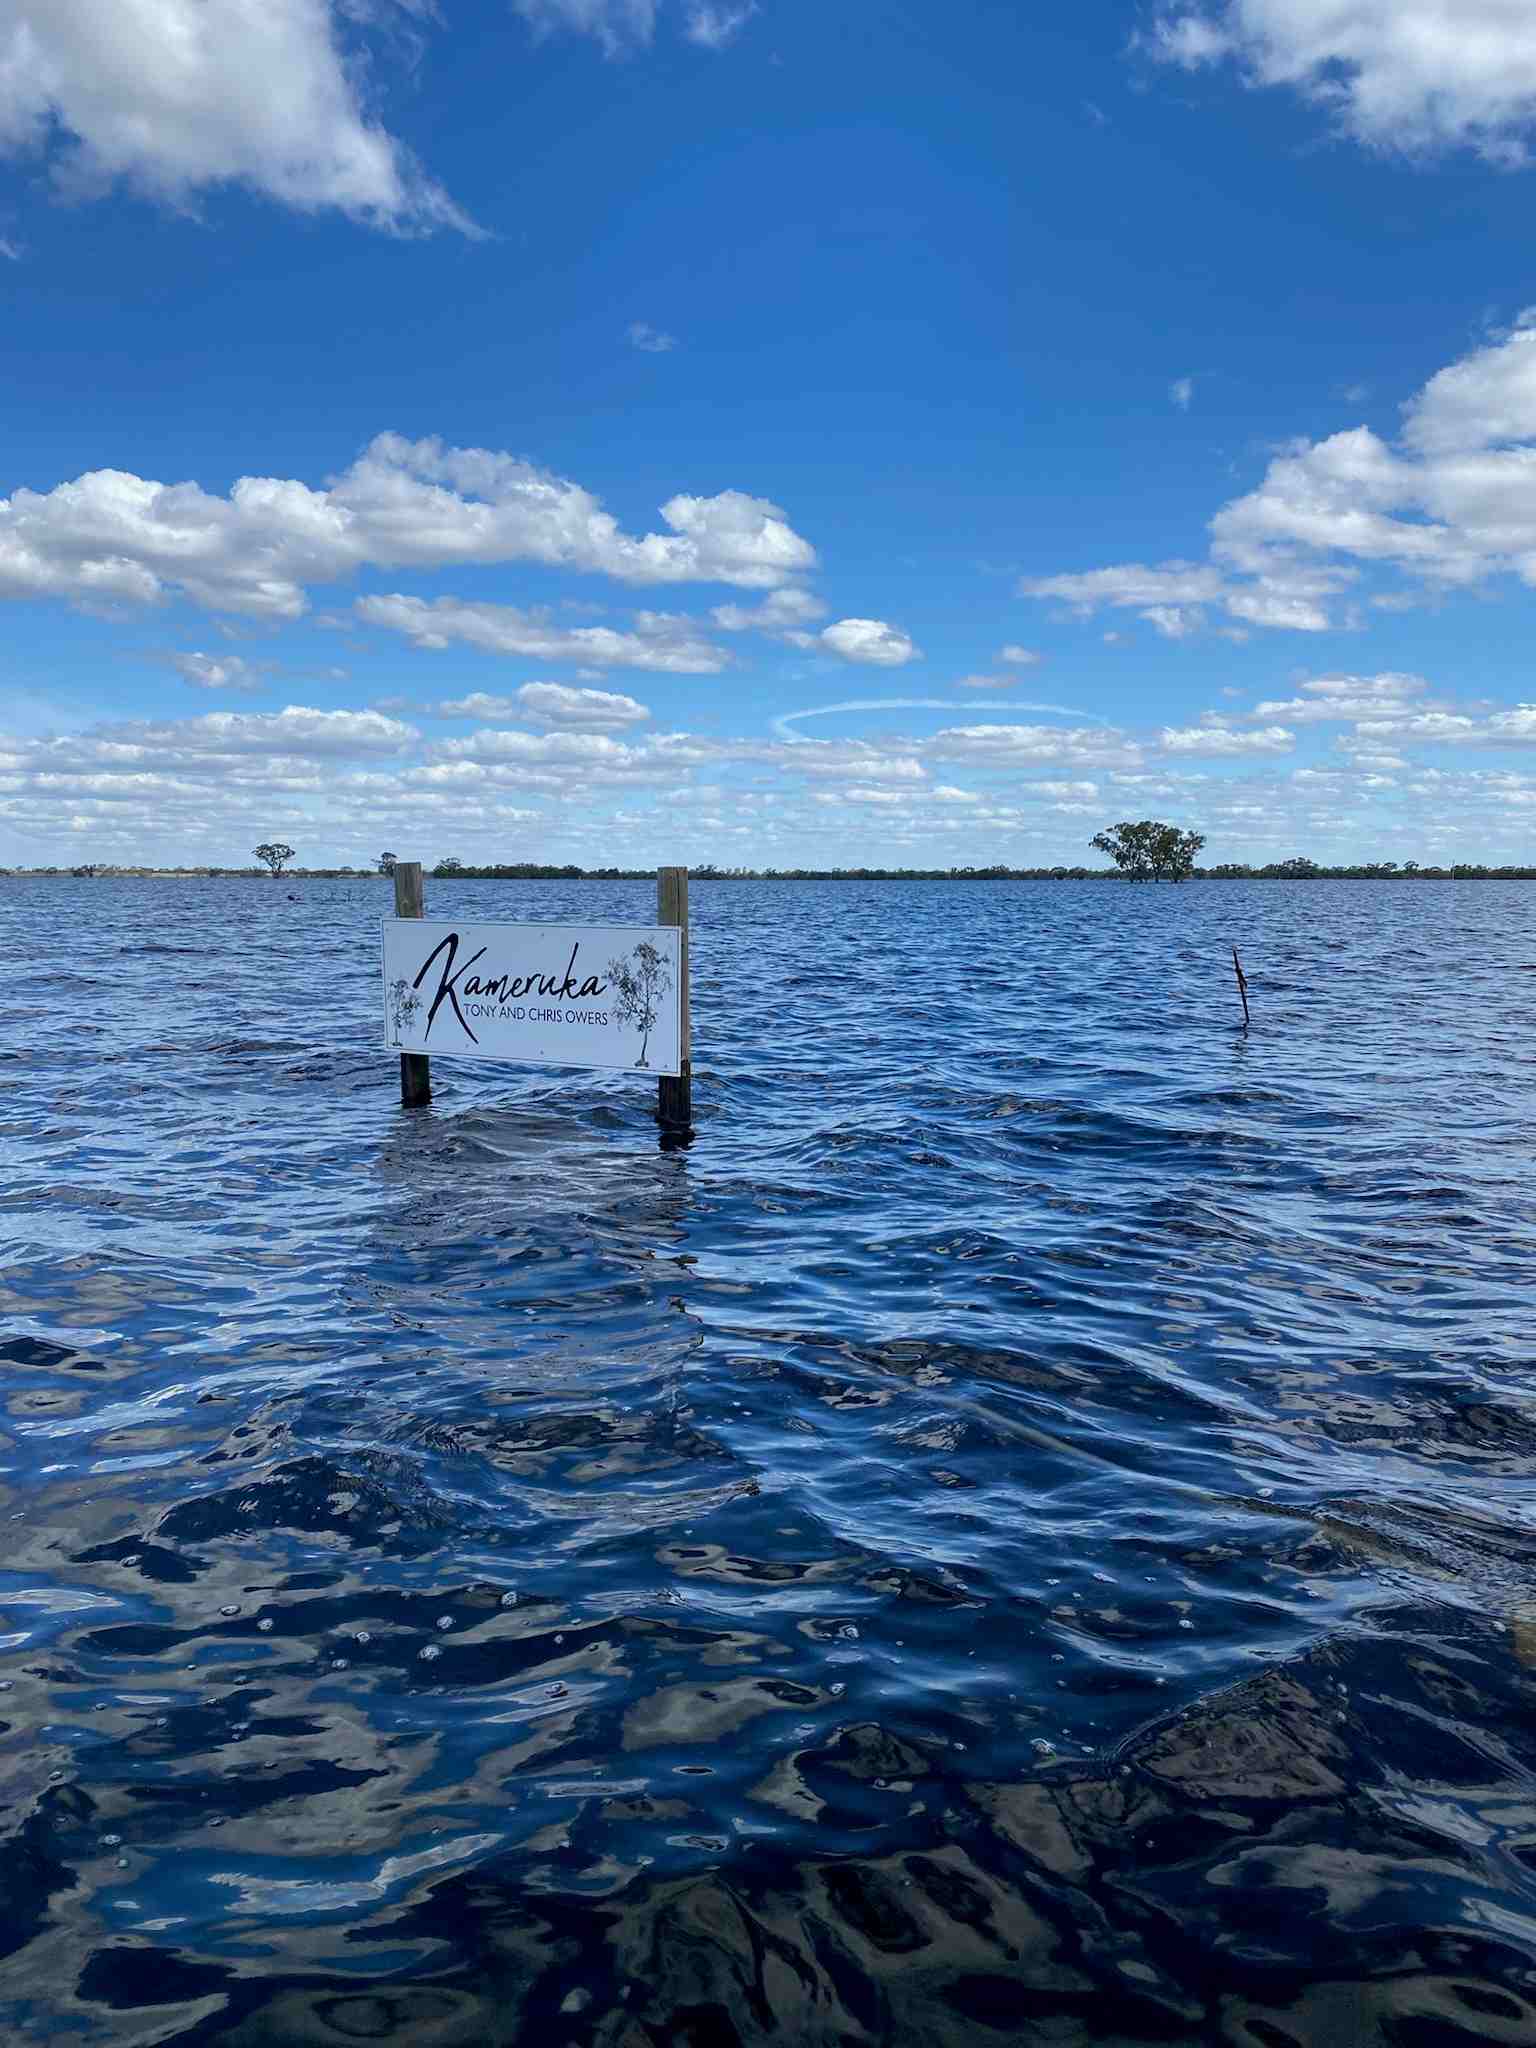 Kameruka (Tony and Chris Owers) sign surrounded by flood waters